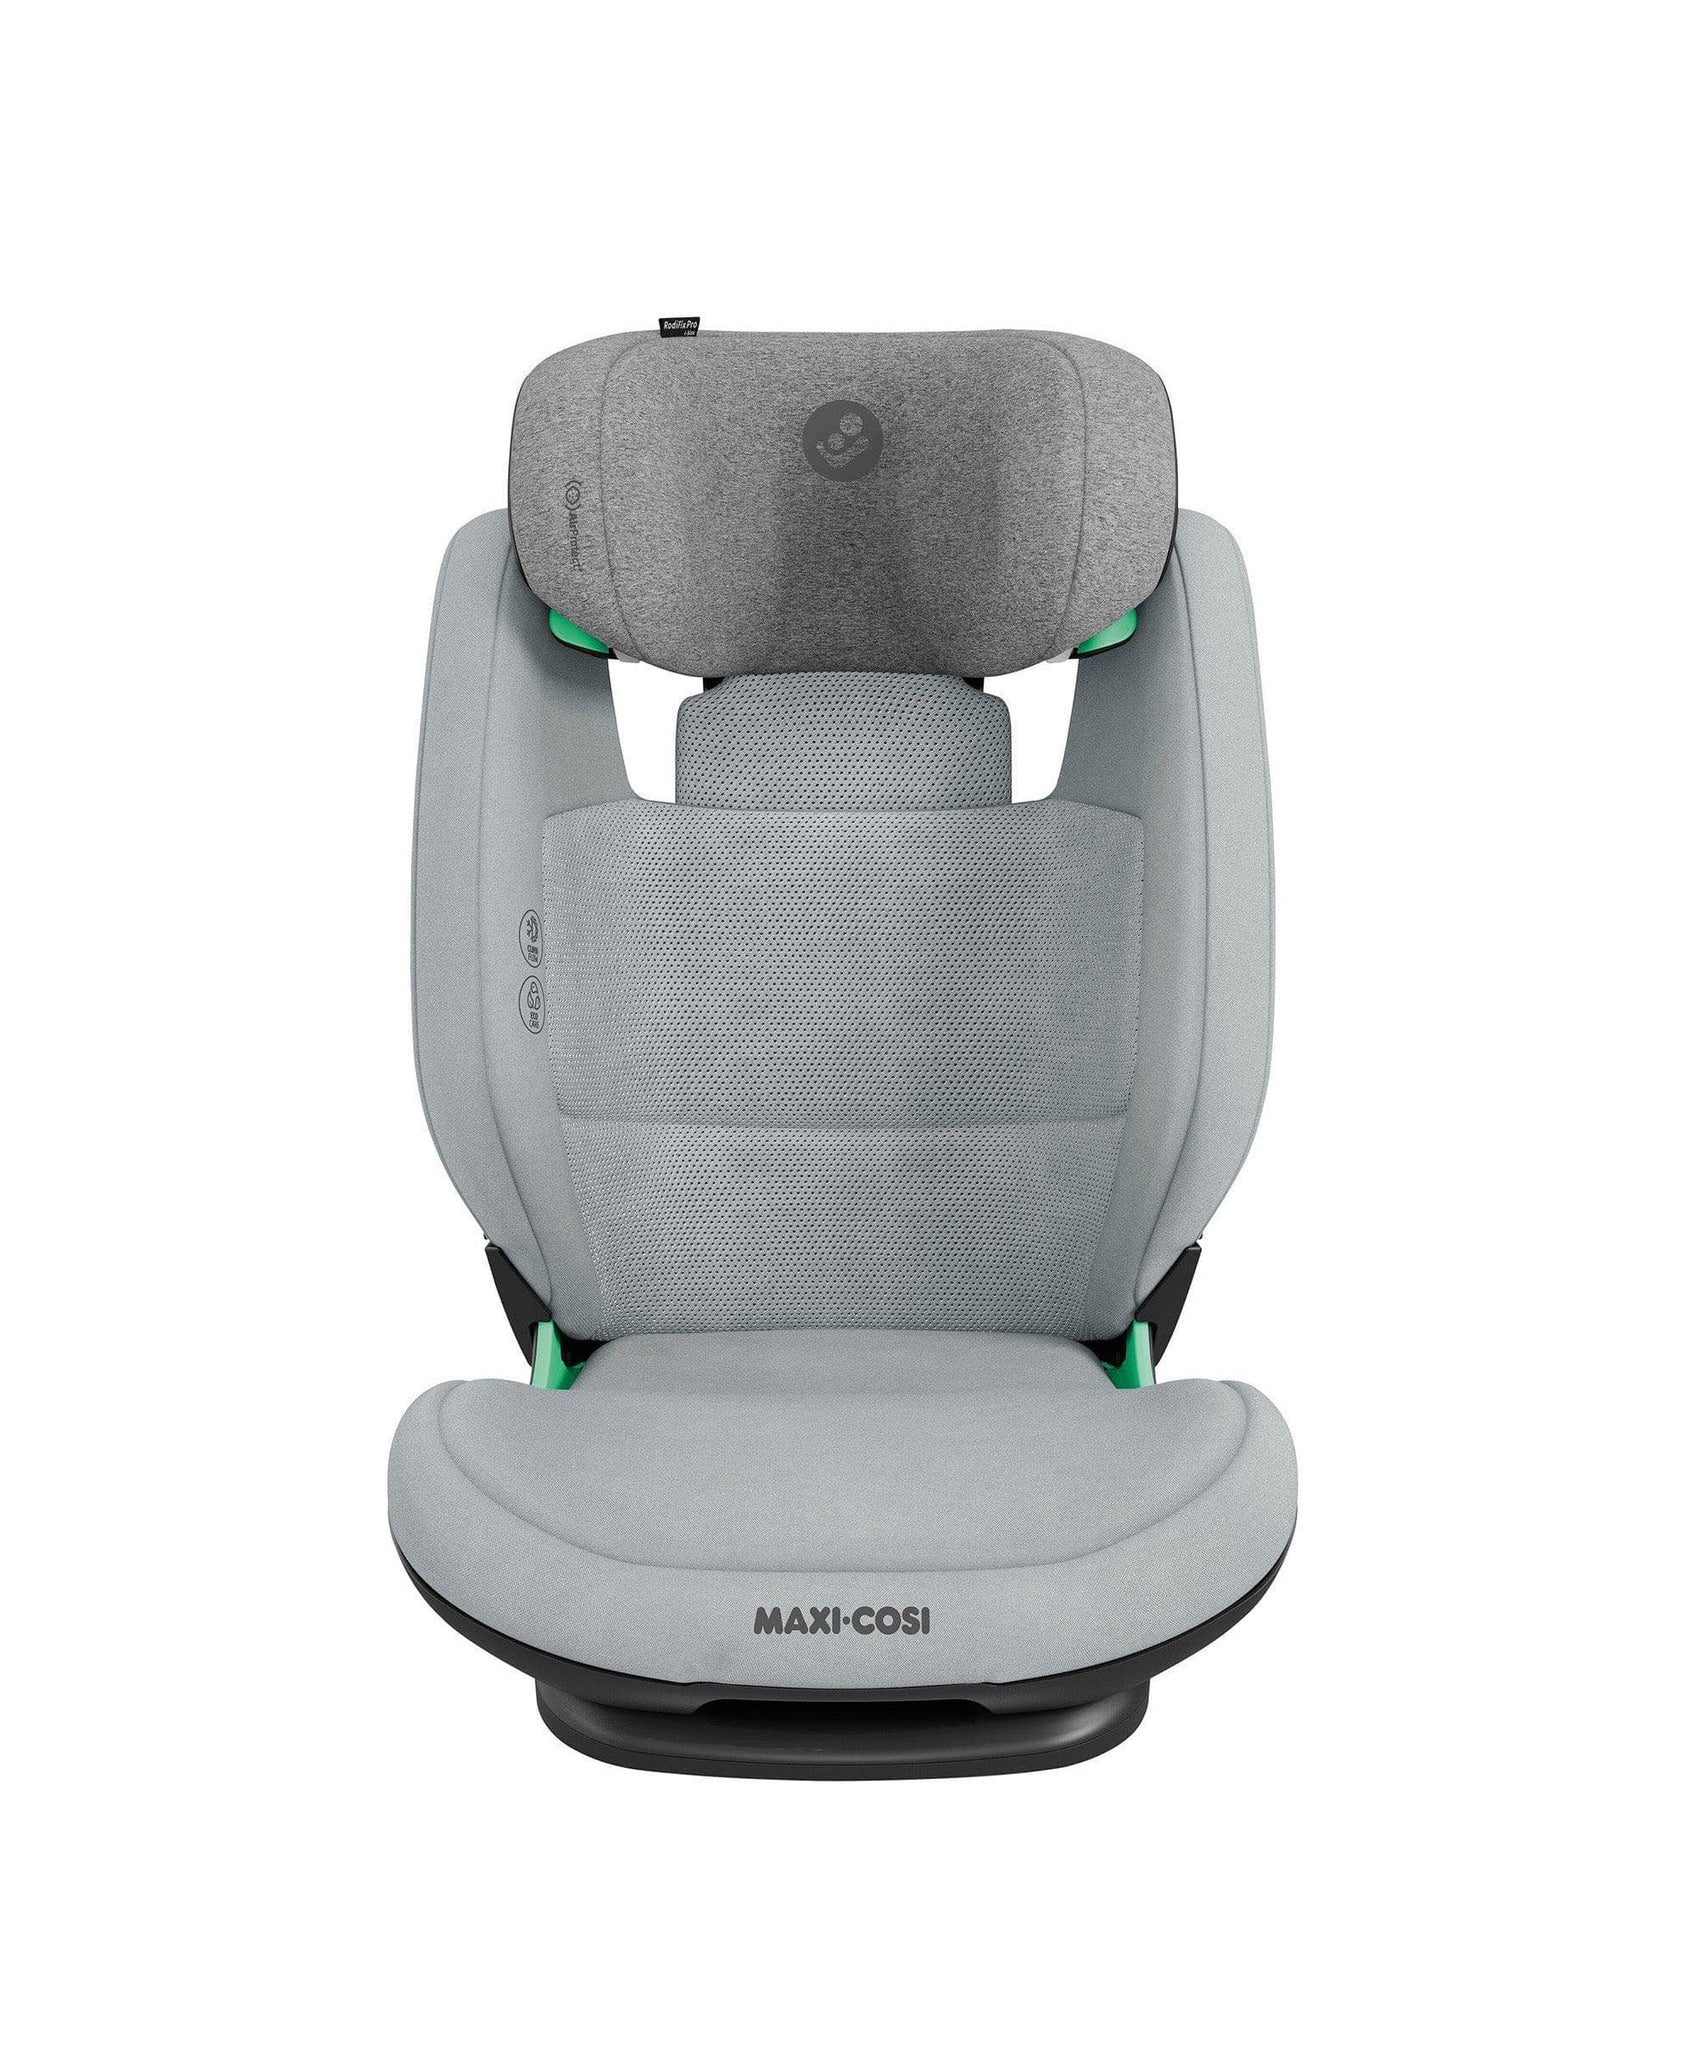 Group 2/3 car seats for older children - Maxi-Cosi